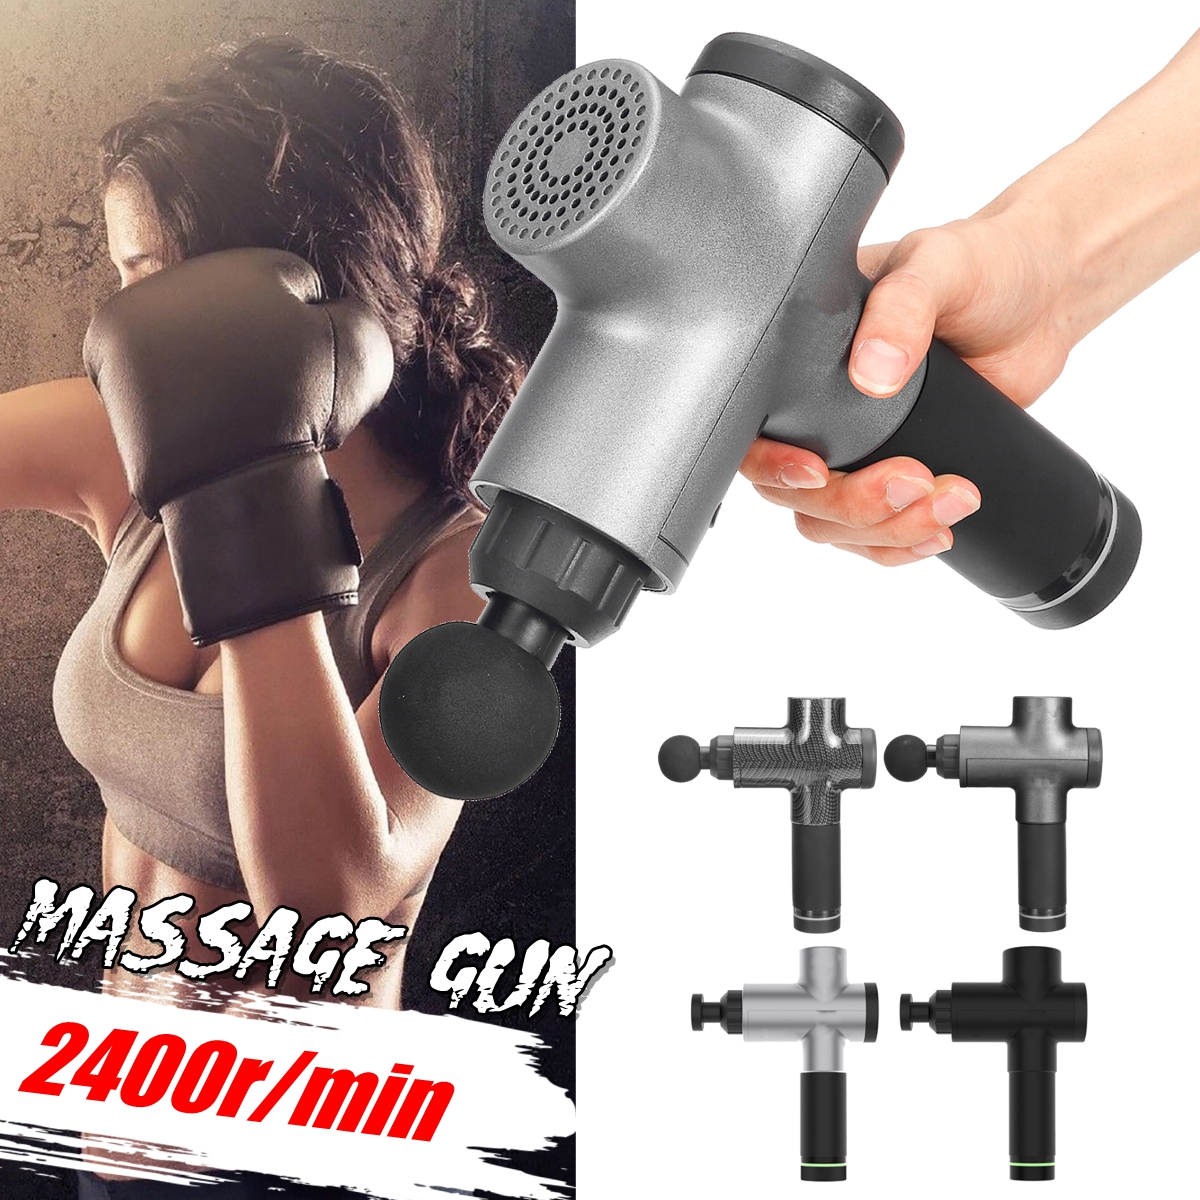 1500mAh Muscle Relaxation 3 Speed Electric Massager